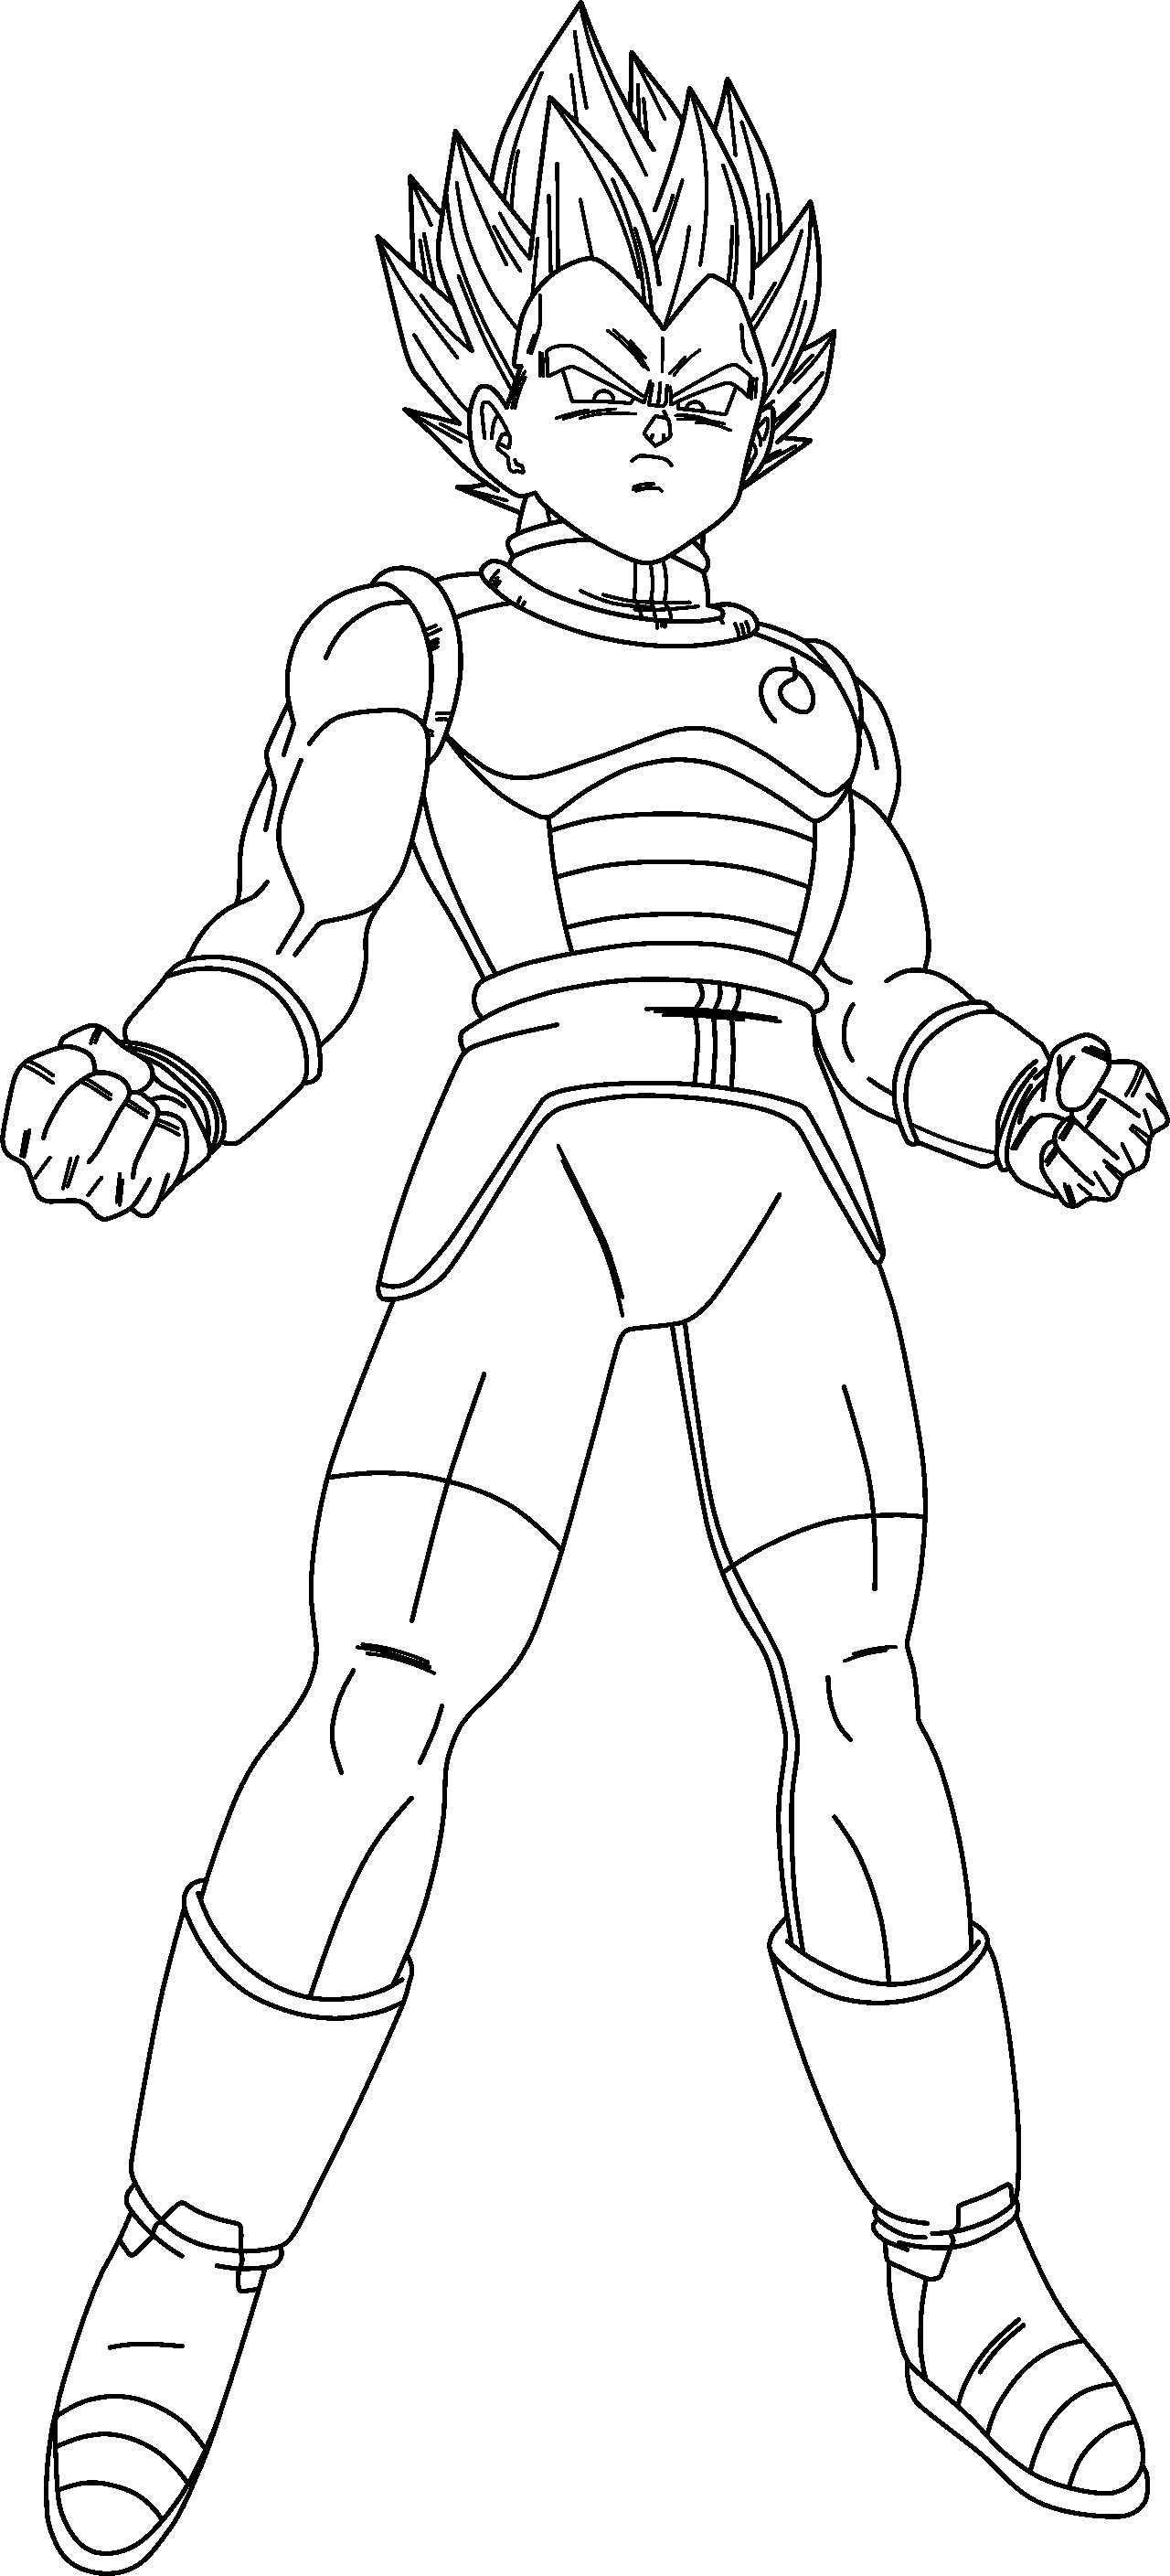 Dragon Ball Z Coloring Pages Goku And Vegeta - Coloring and Drawing